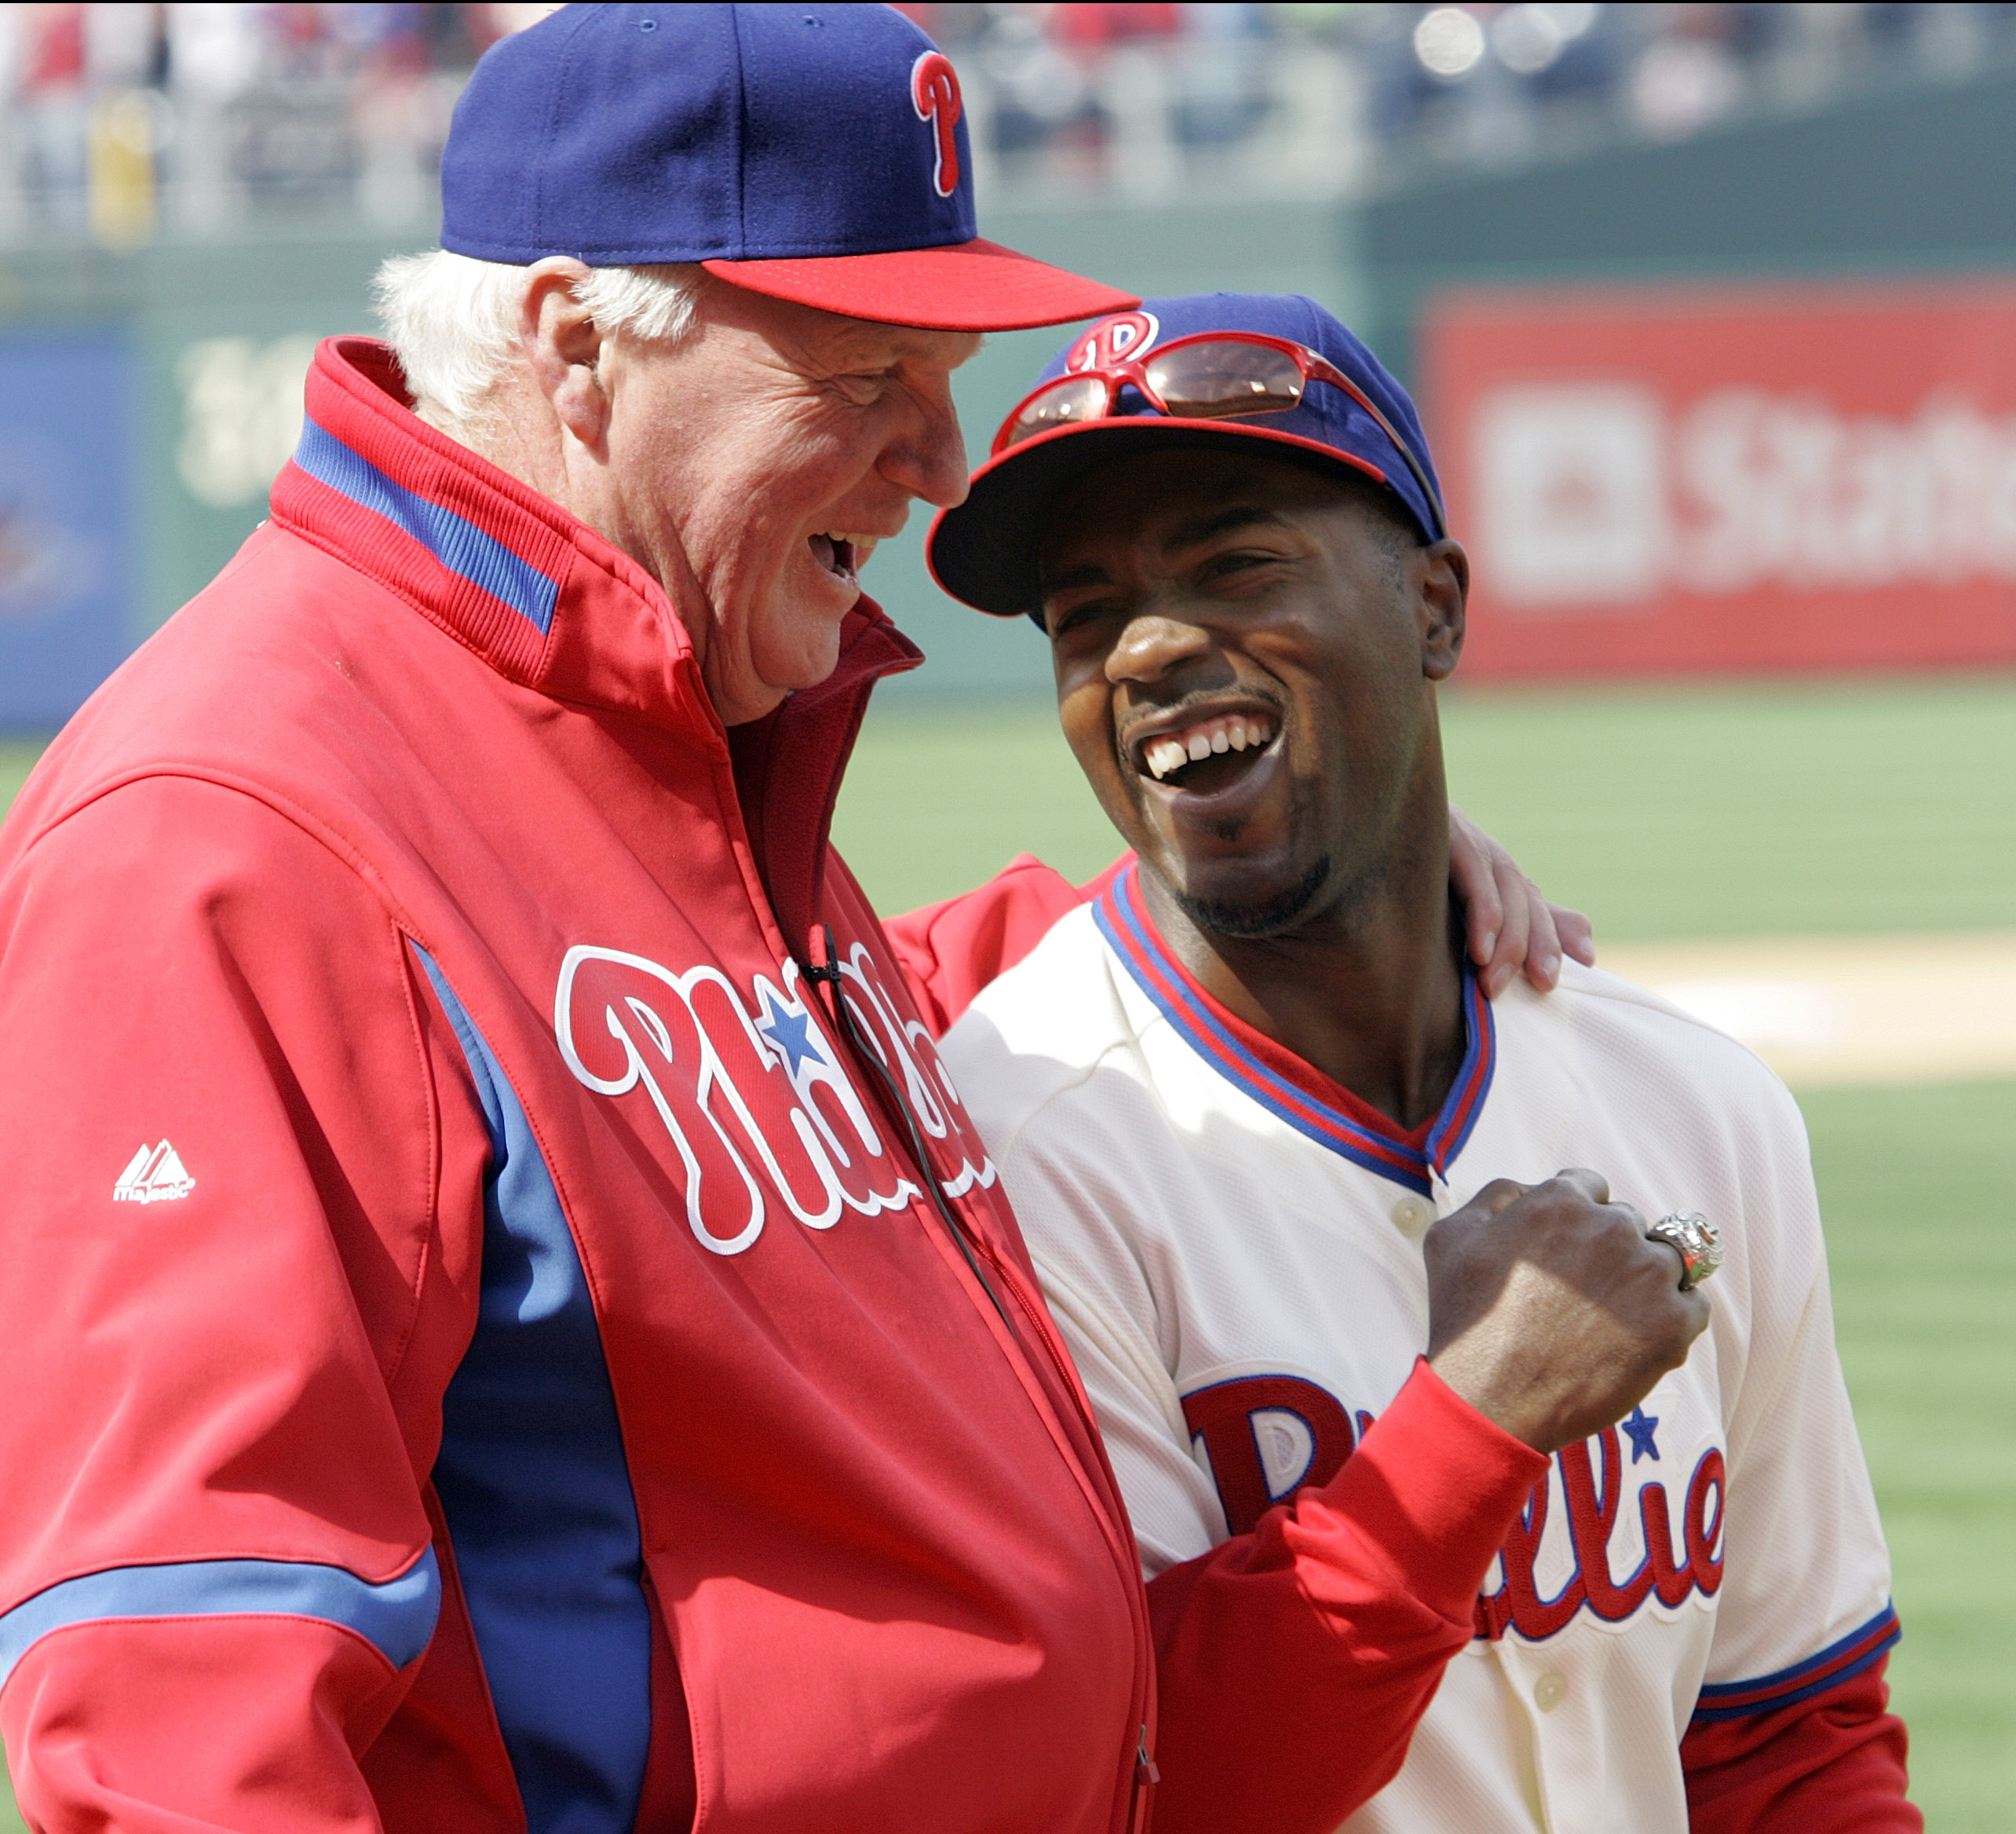 Phils don new rings  The Spokesman-Review